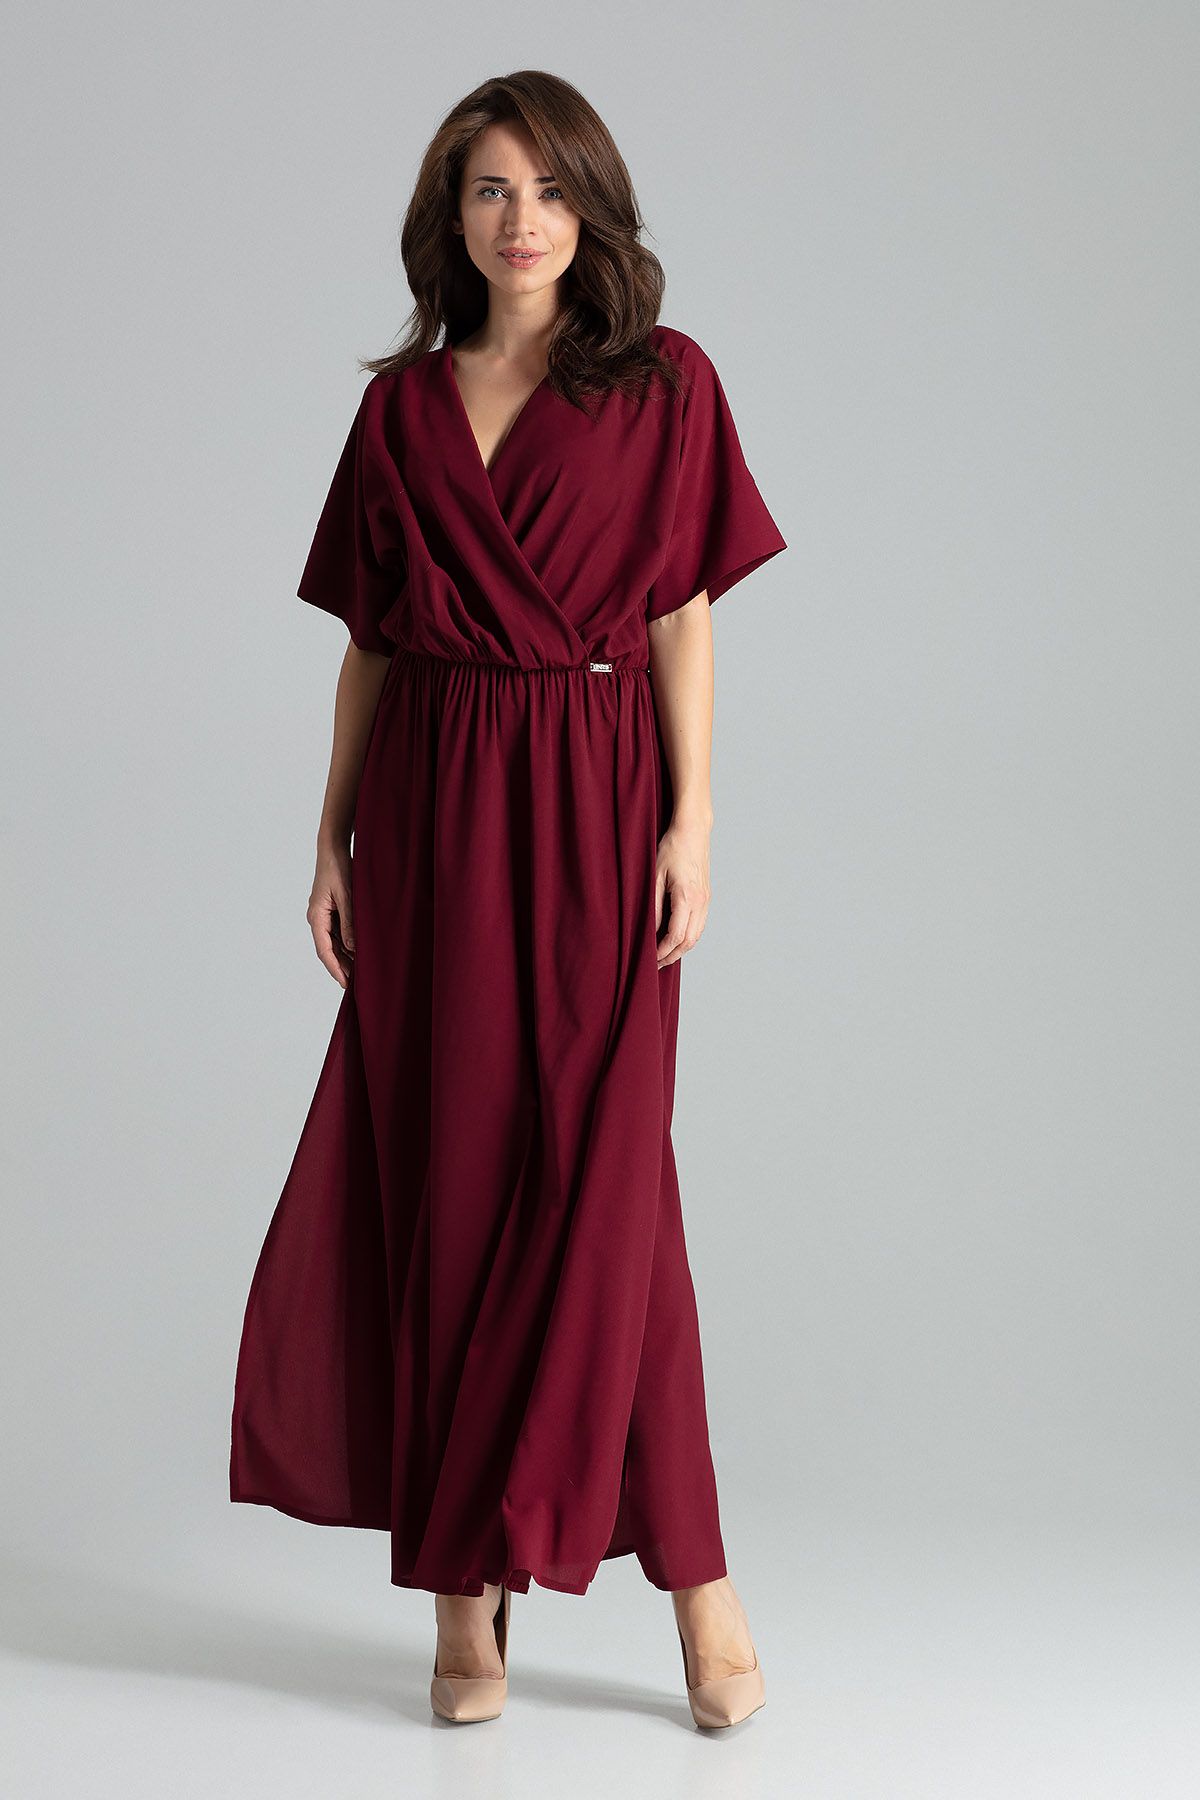 Deep Red maxi dress with short sleeves